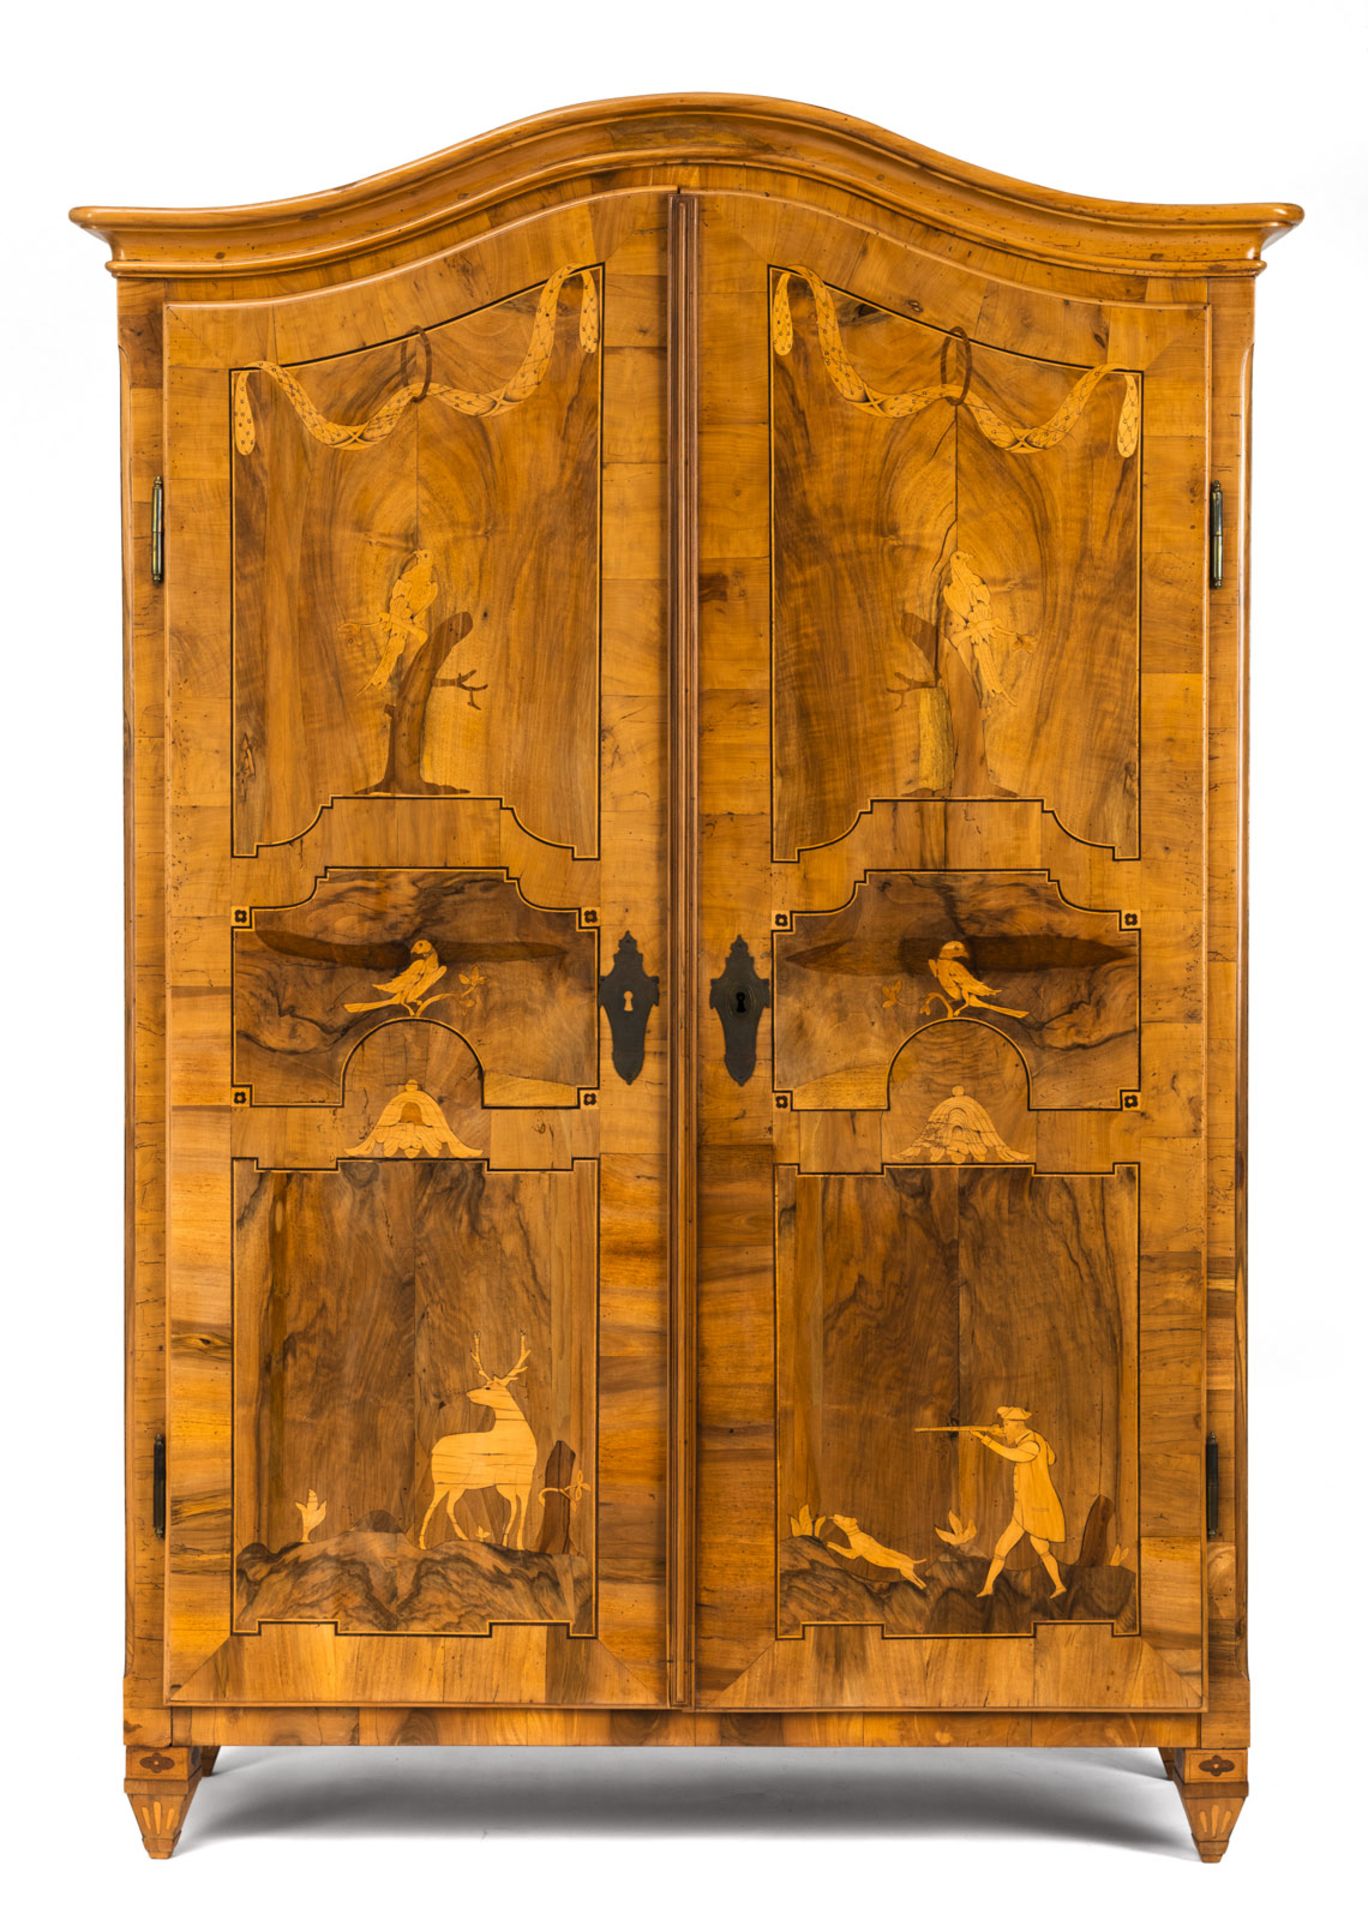 AN AUSTRIAN BRASS MOUNTED WALNUT AND MARQUTRIED JOSEPHINIAN CUPBOARD - Image 6 of 10